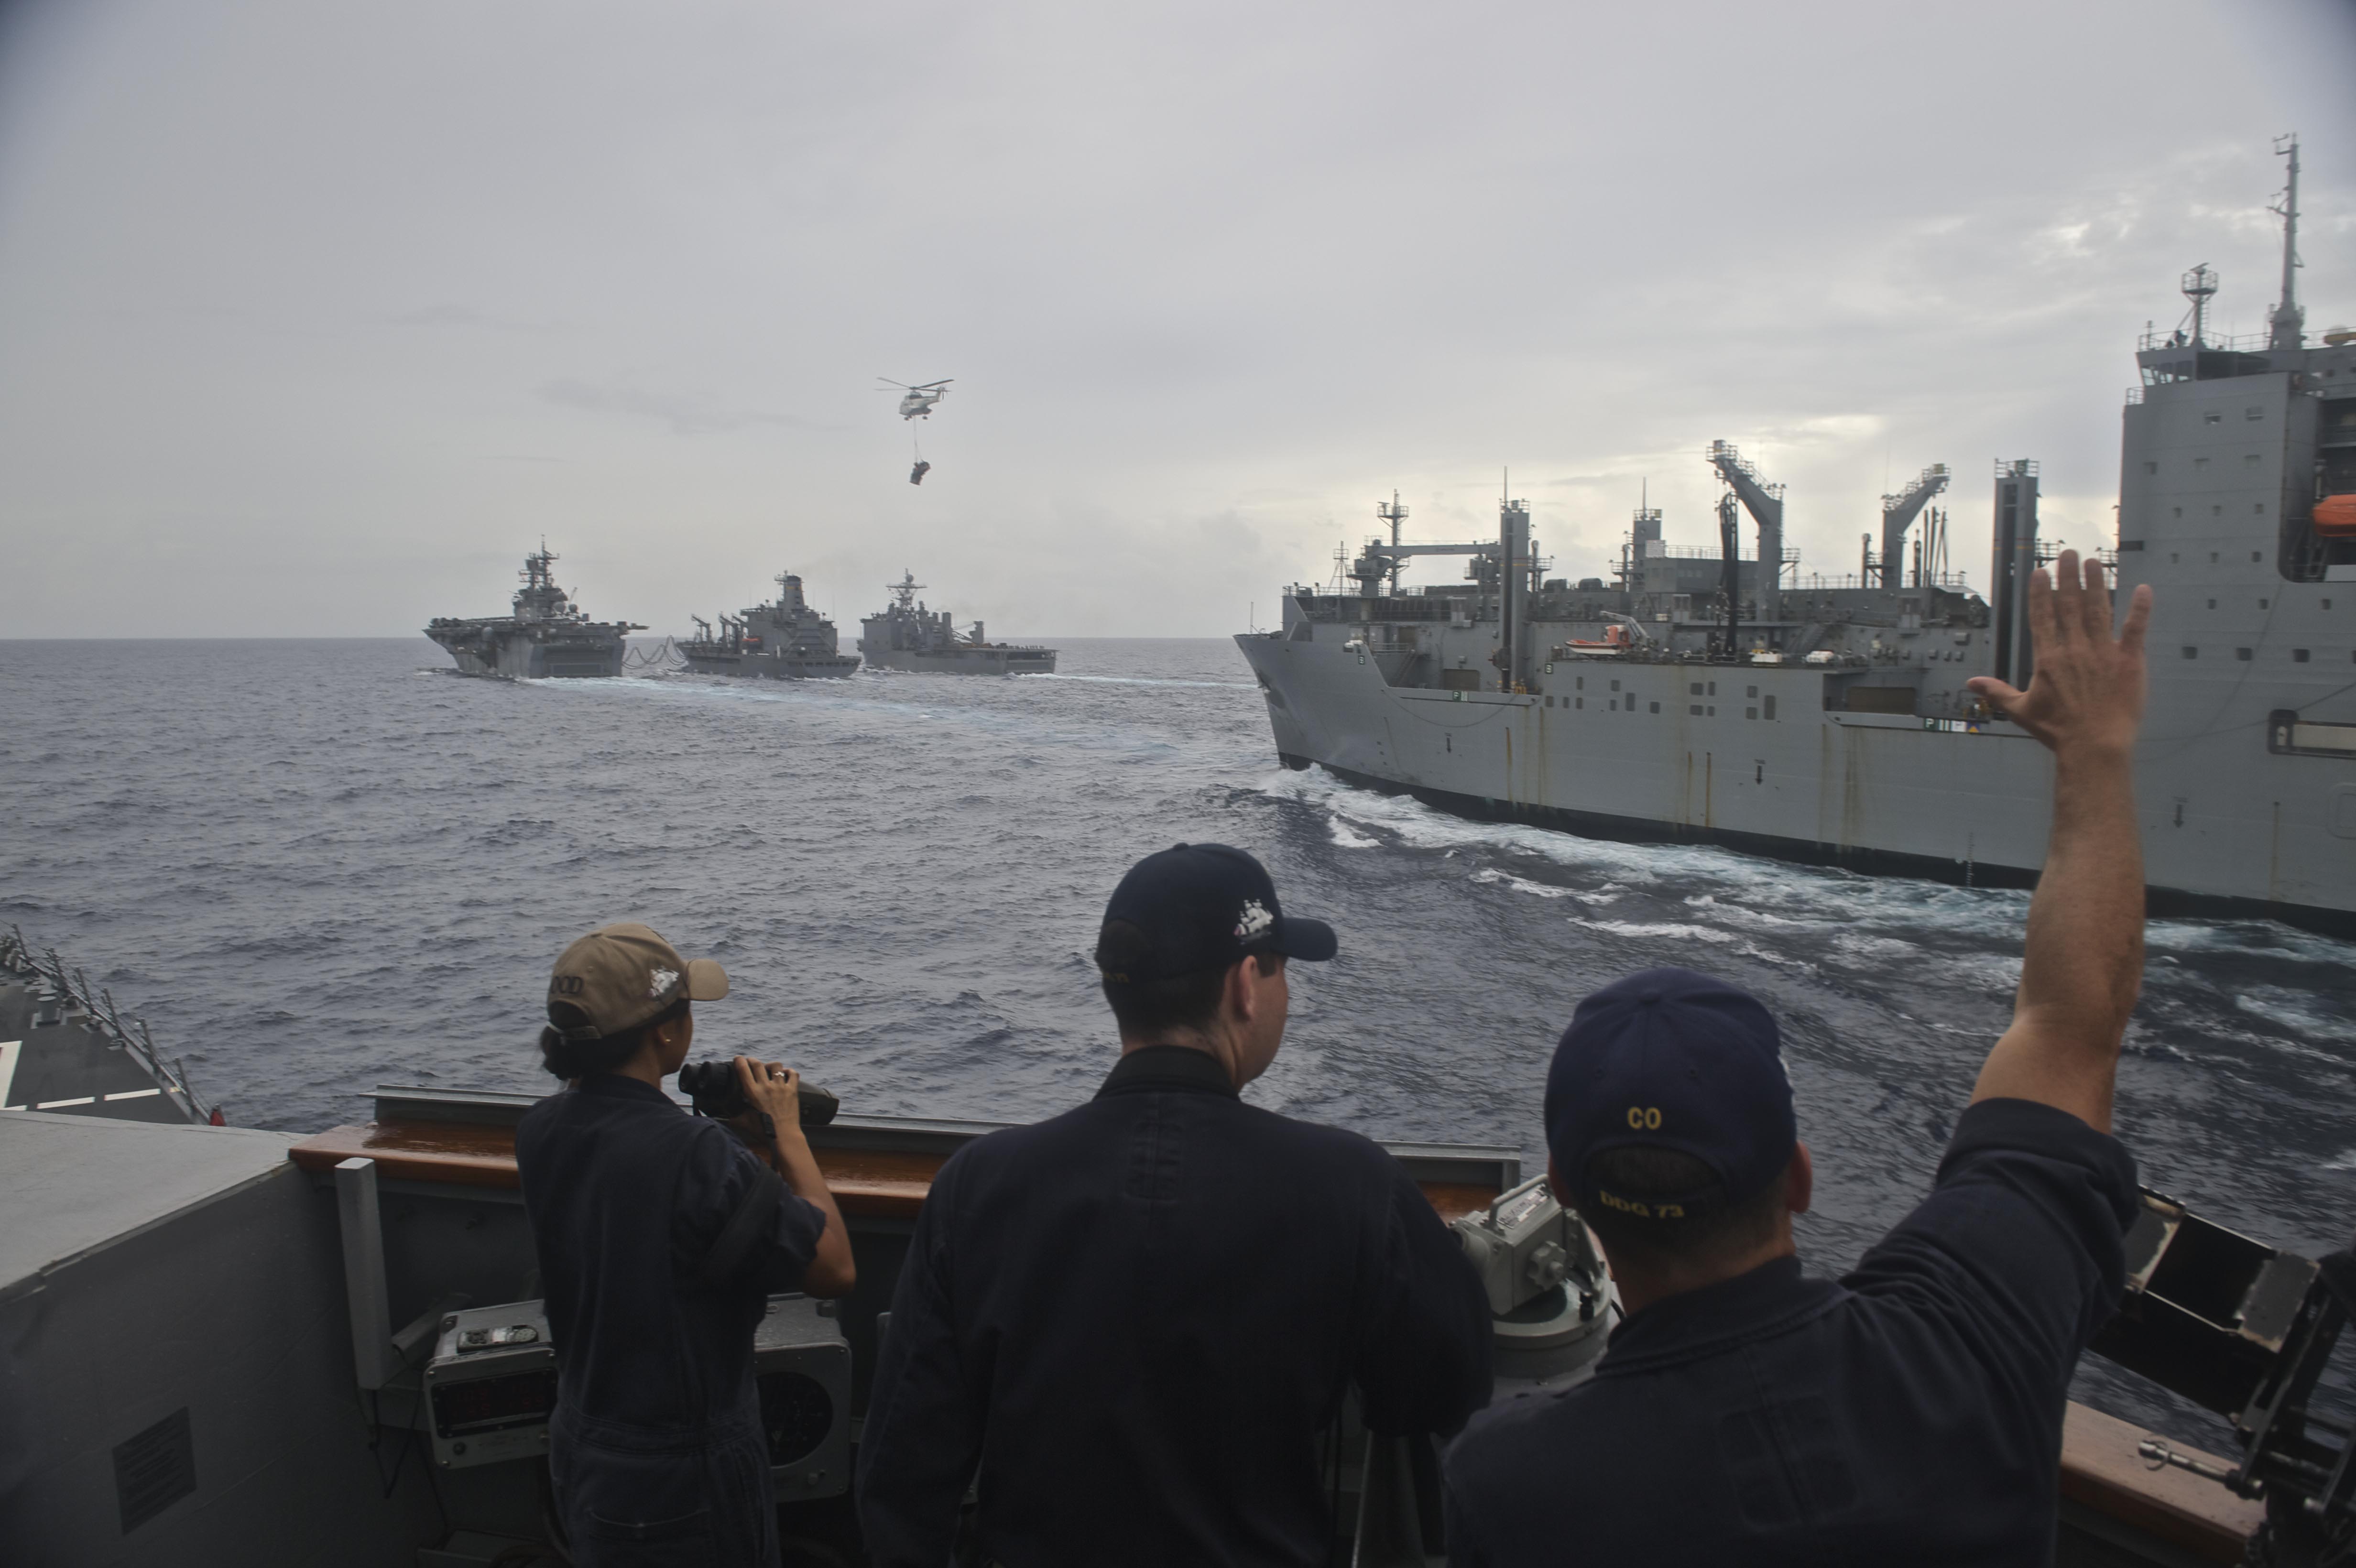 Cmdr. Garrett Miller, commanding officer of the guided-missile destroyer USS Decatur (DDG 73) greets the Military Sealift Command dry cargo and ammunition ship USNS Washington Chambers (T-AKE 11) as it conducts a replenishment-at-sea with the Bonhomme Richard Expeditionary Strike Group (BHR ESG) as part of interoperability drills between the Pacific Surface Action Group (PAC SAG) and BHR ESG. The drills are meant to enhance readiness of cruiser-destroyer ships to rapidly integrate with an amphibious task force to provide increased capability for amphibious operations in support of crisis response or disaster relief. US Navy photo.